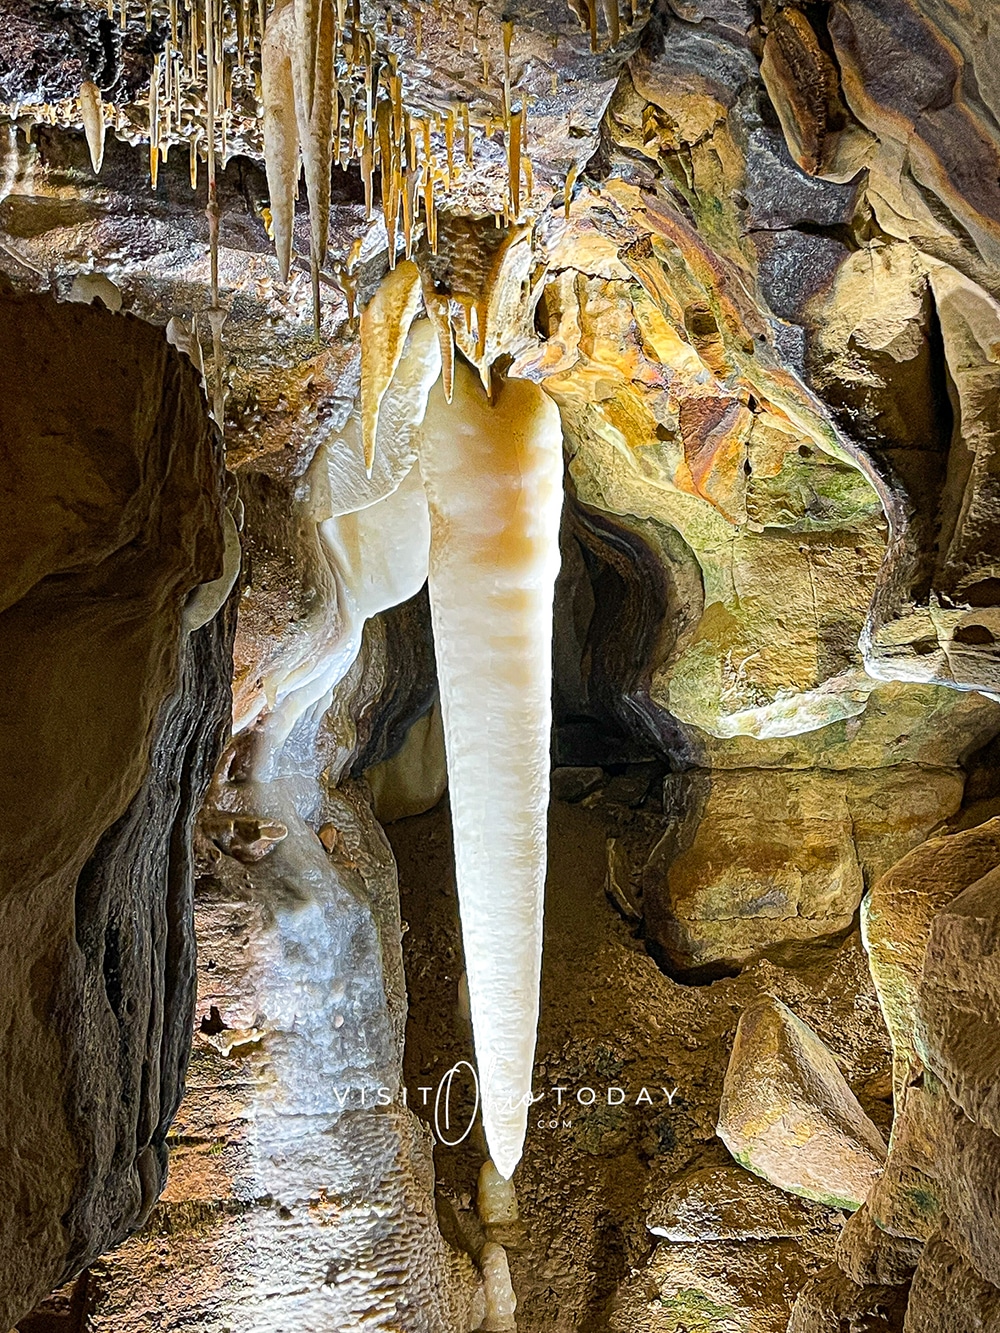 vertical photo of the ohio caverns with a large white stalactite and other small stalactite hanging from the top Photo credit: Cindy Gordon of VisitOhioToday.com